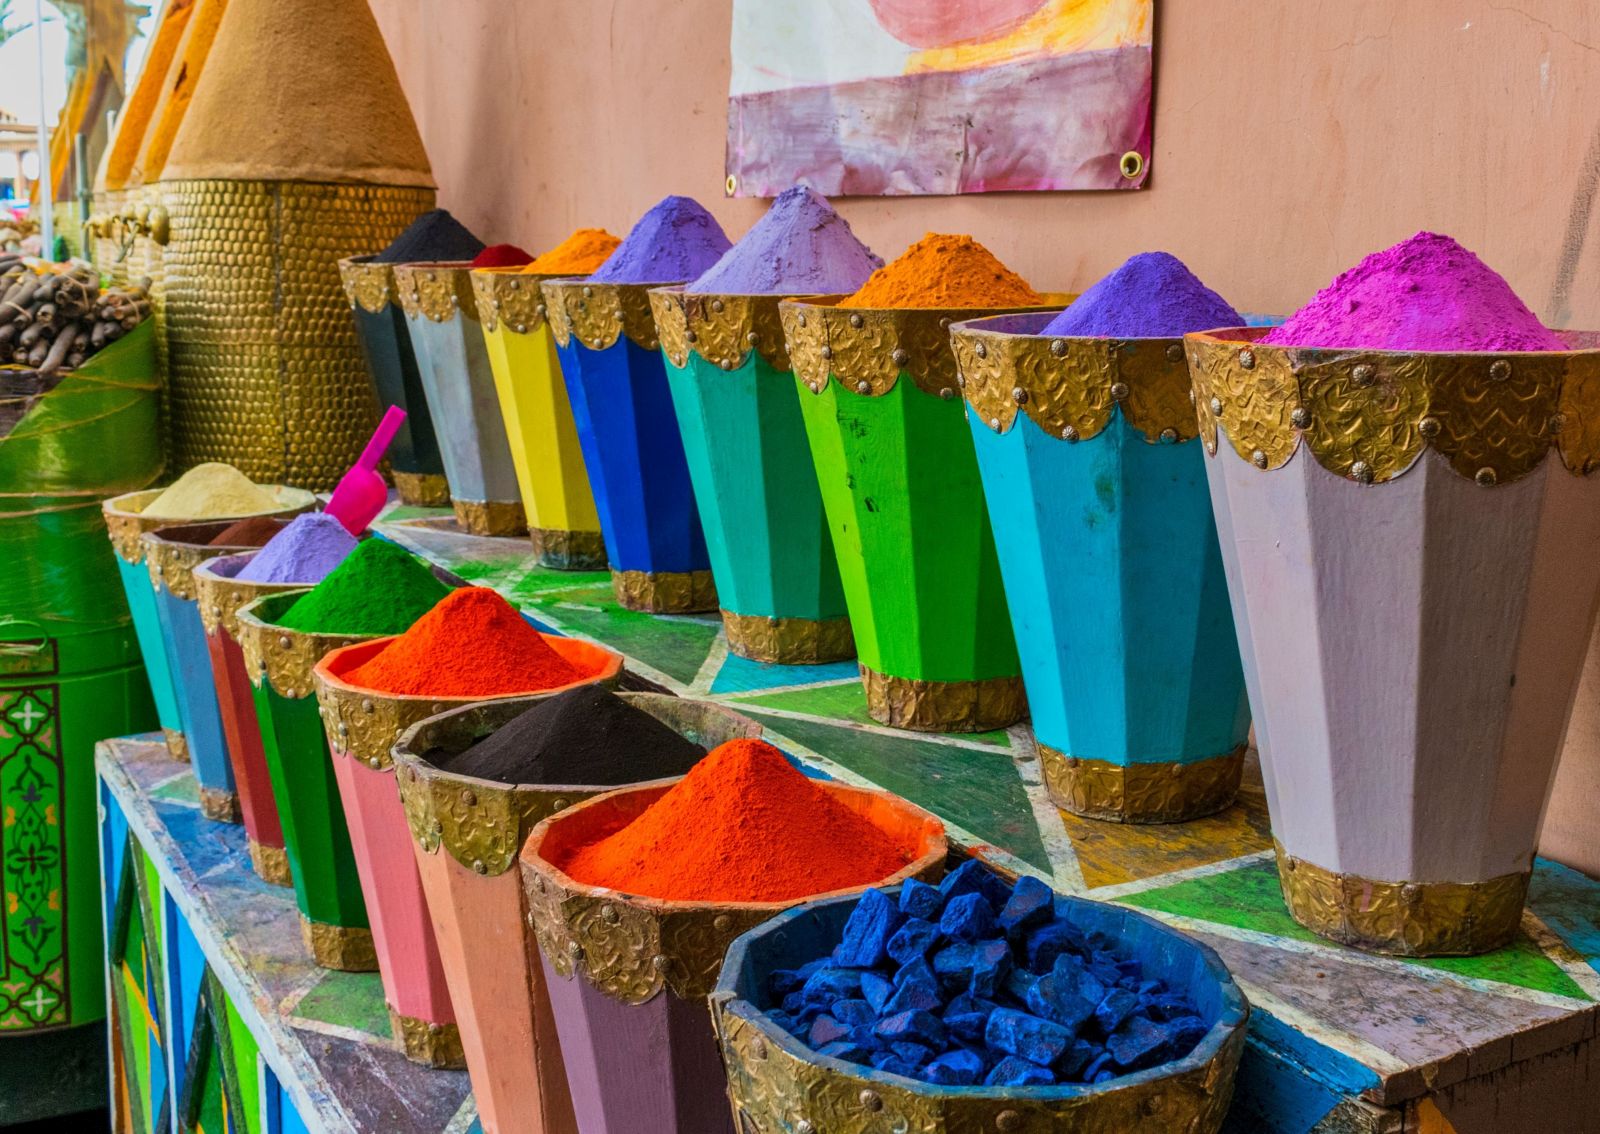 Urns of brightly coloured dyes at a market in Morocco